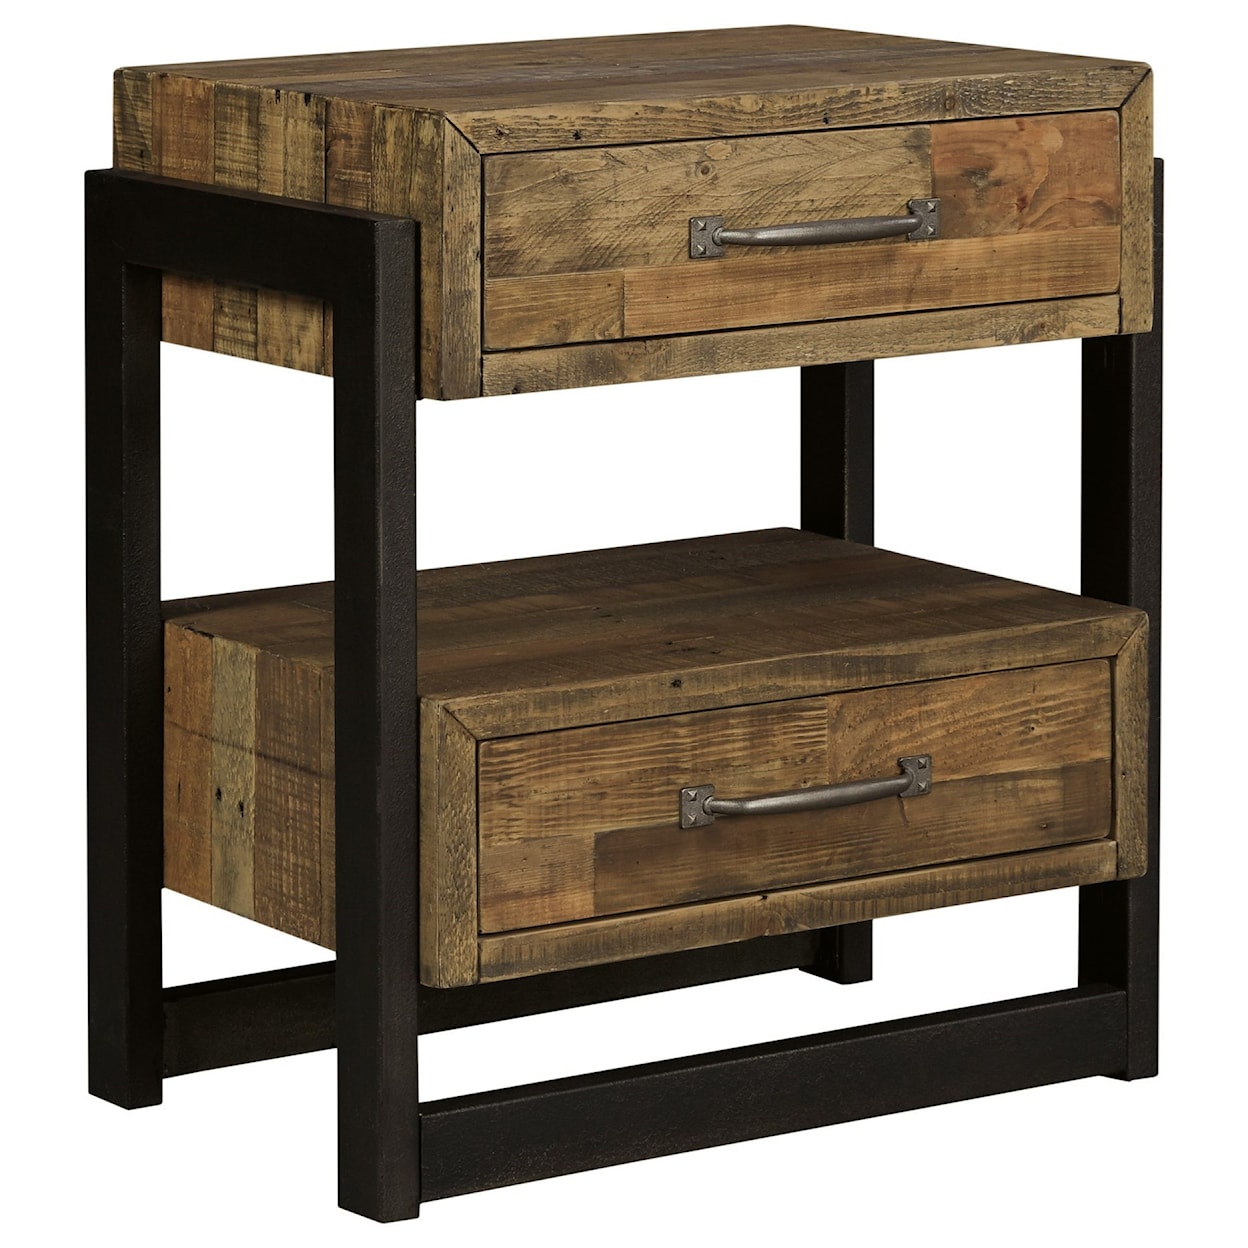 Signature Design by Ashley Sommerford 2-Drawer Nightstand